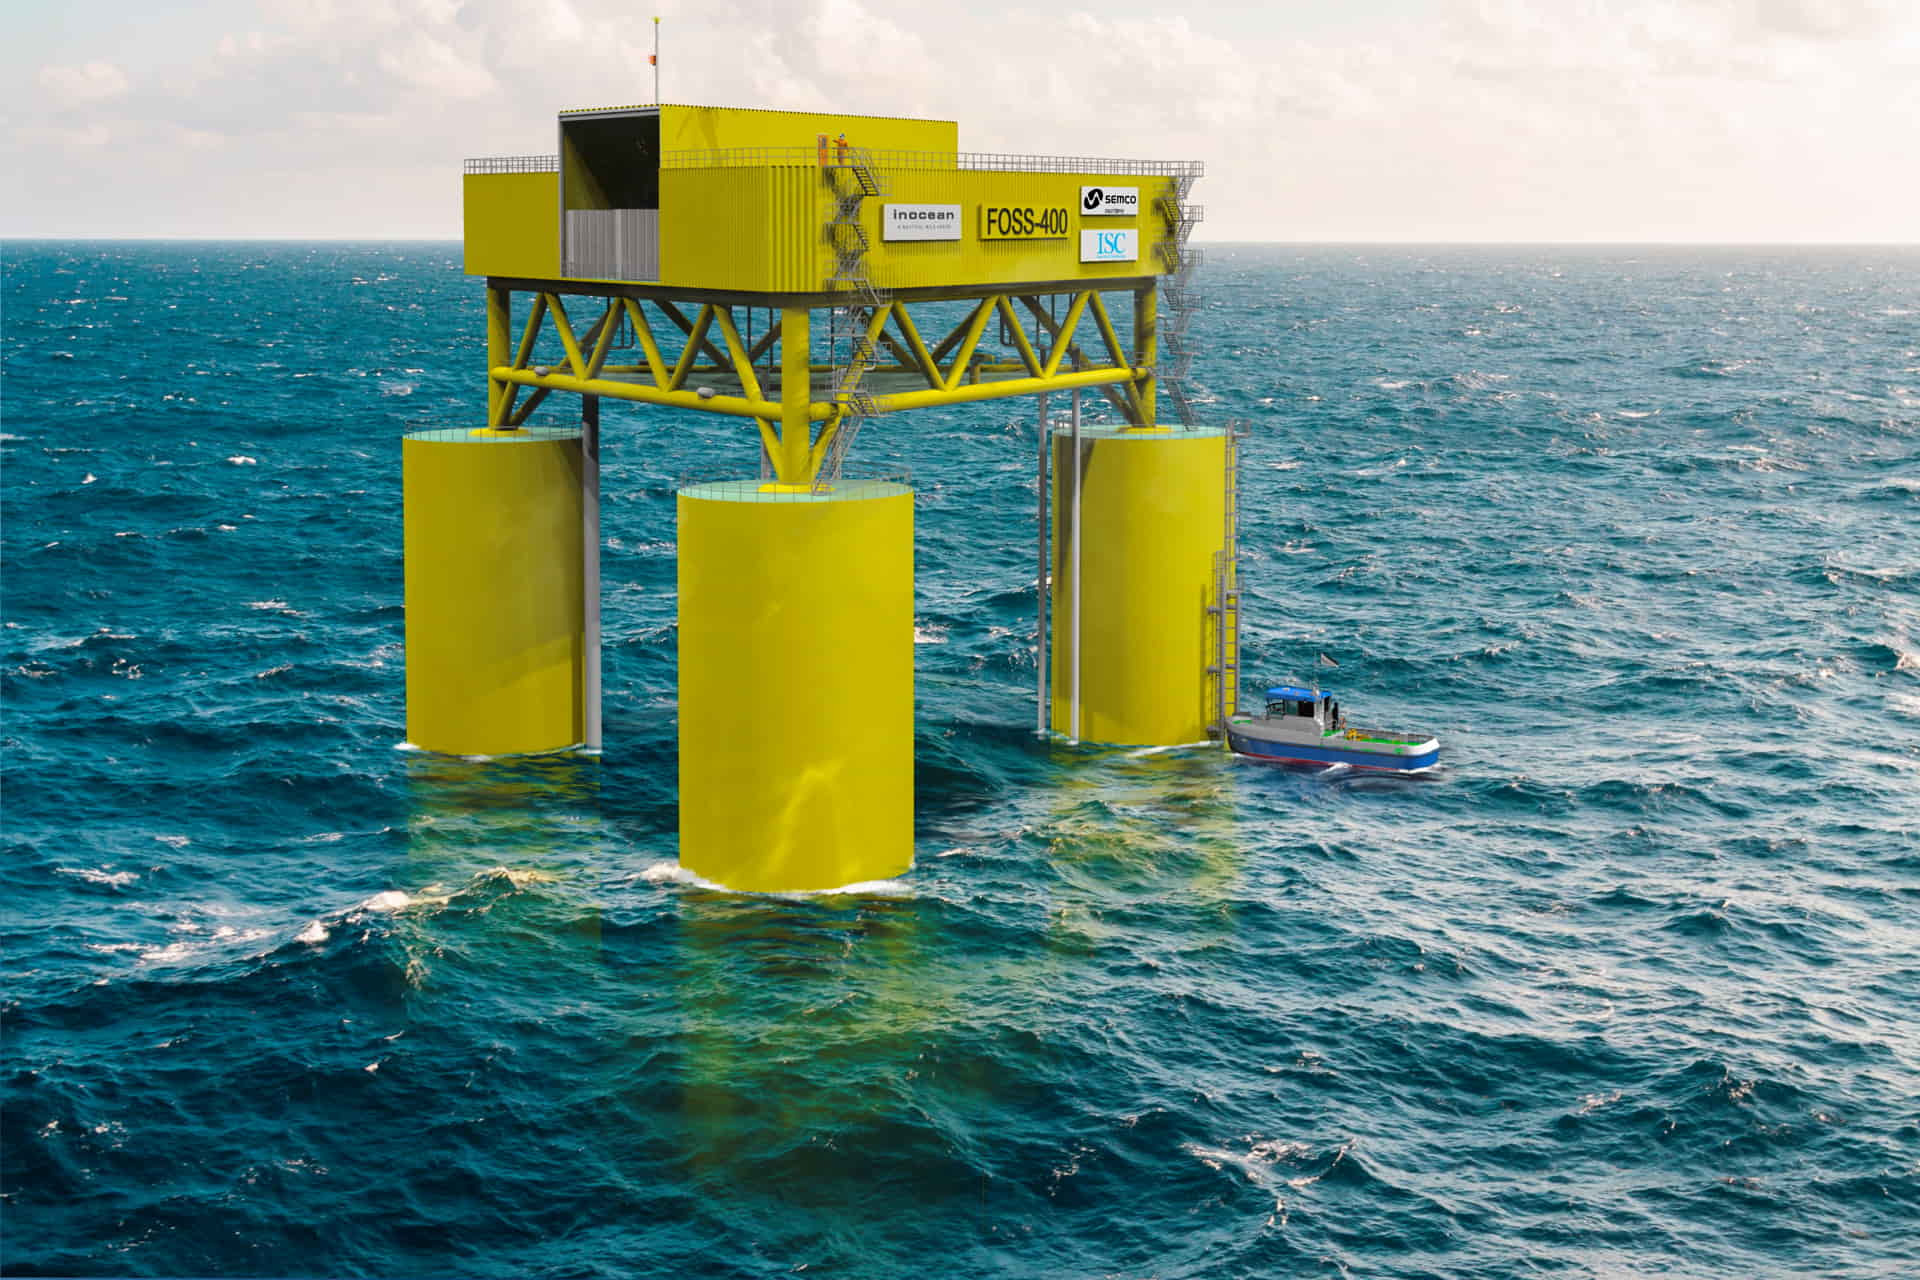 An image rendering of the floating offshore substation developed by Semco Maritime, ISC and Inocean